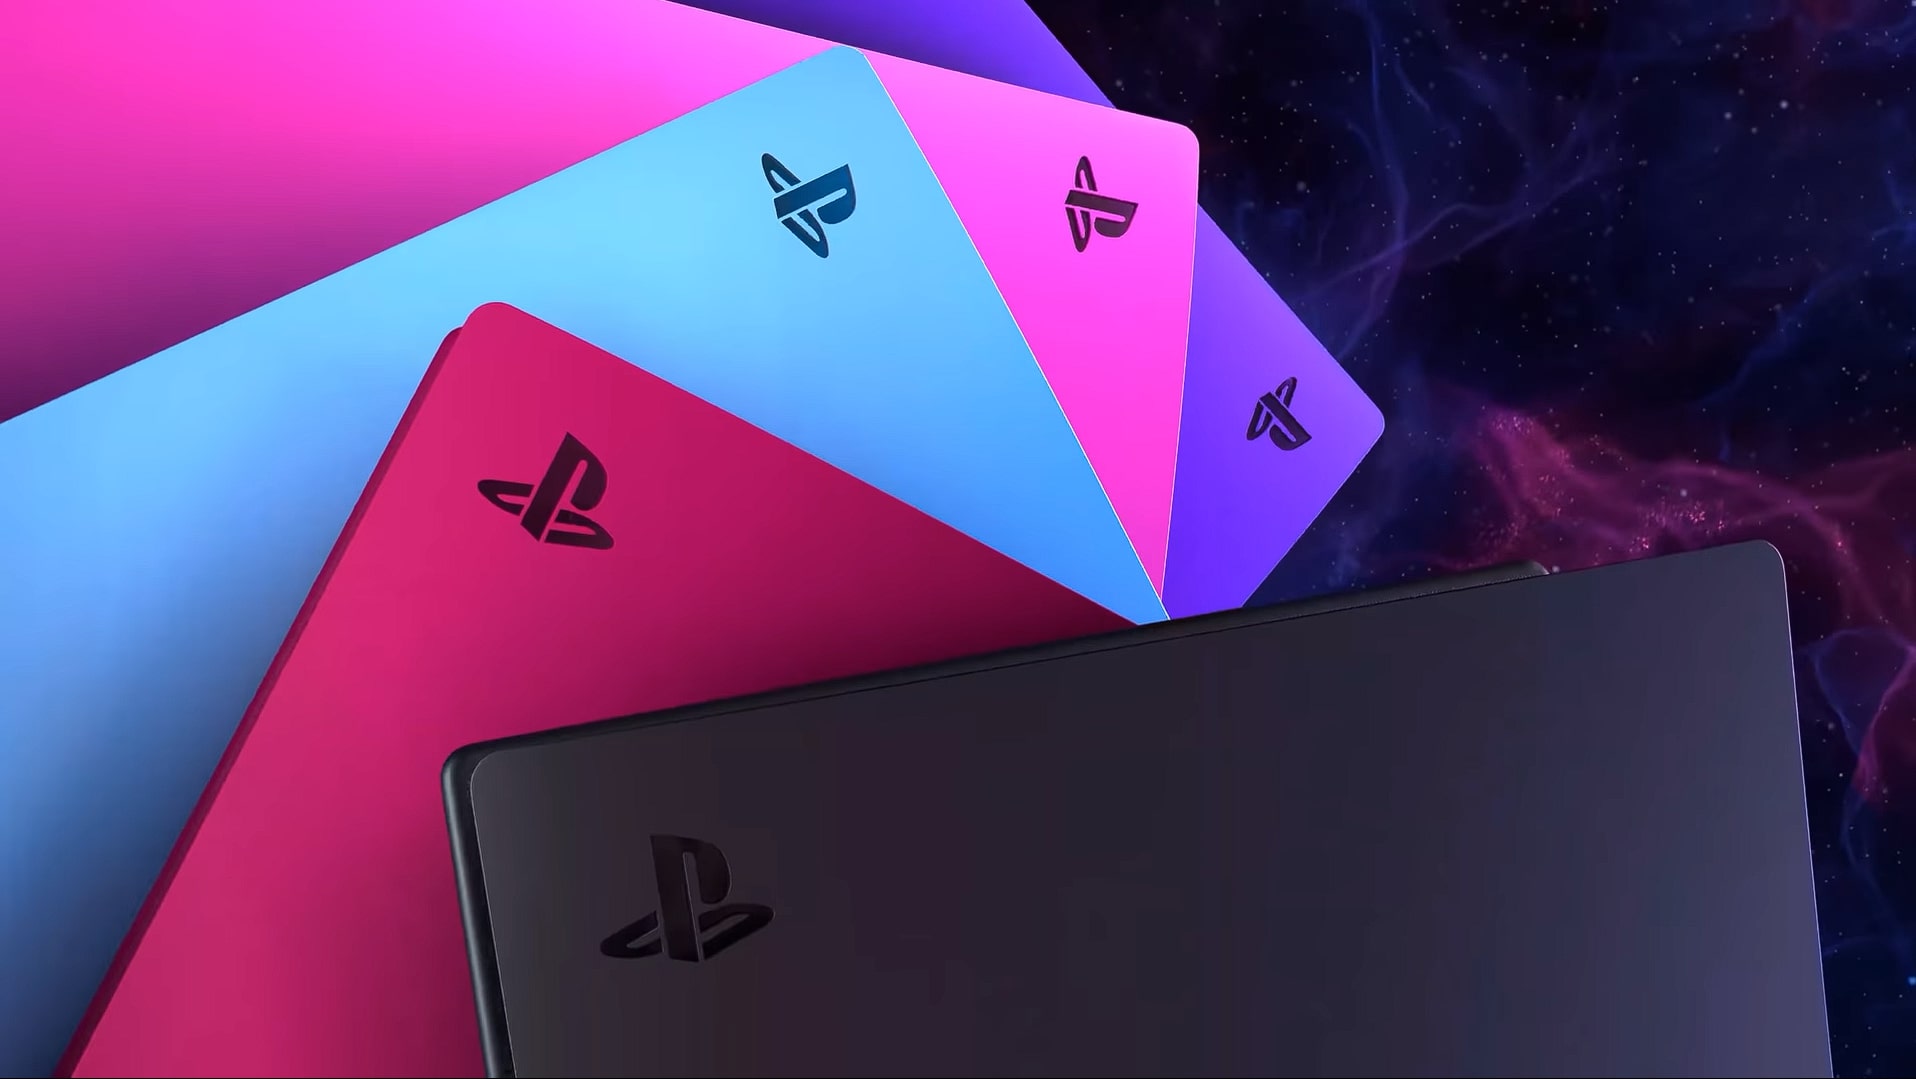 stenografi Skraldespand Parametre Sony Finally Has Official PS5 Faceplates On The Way | Digital Trends